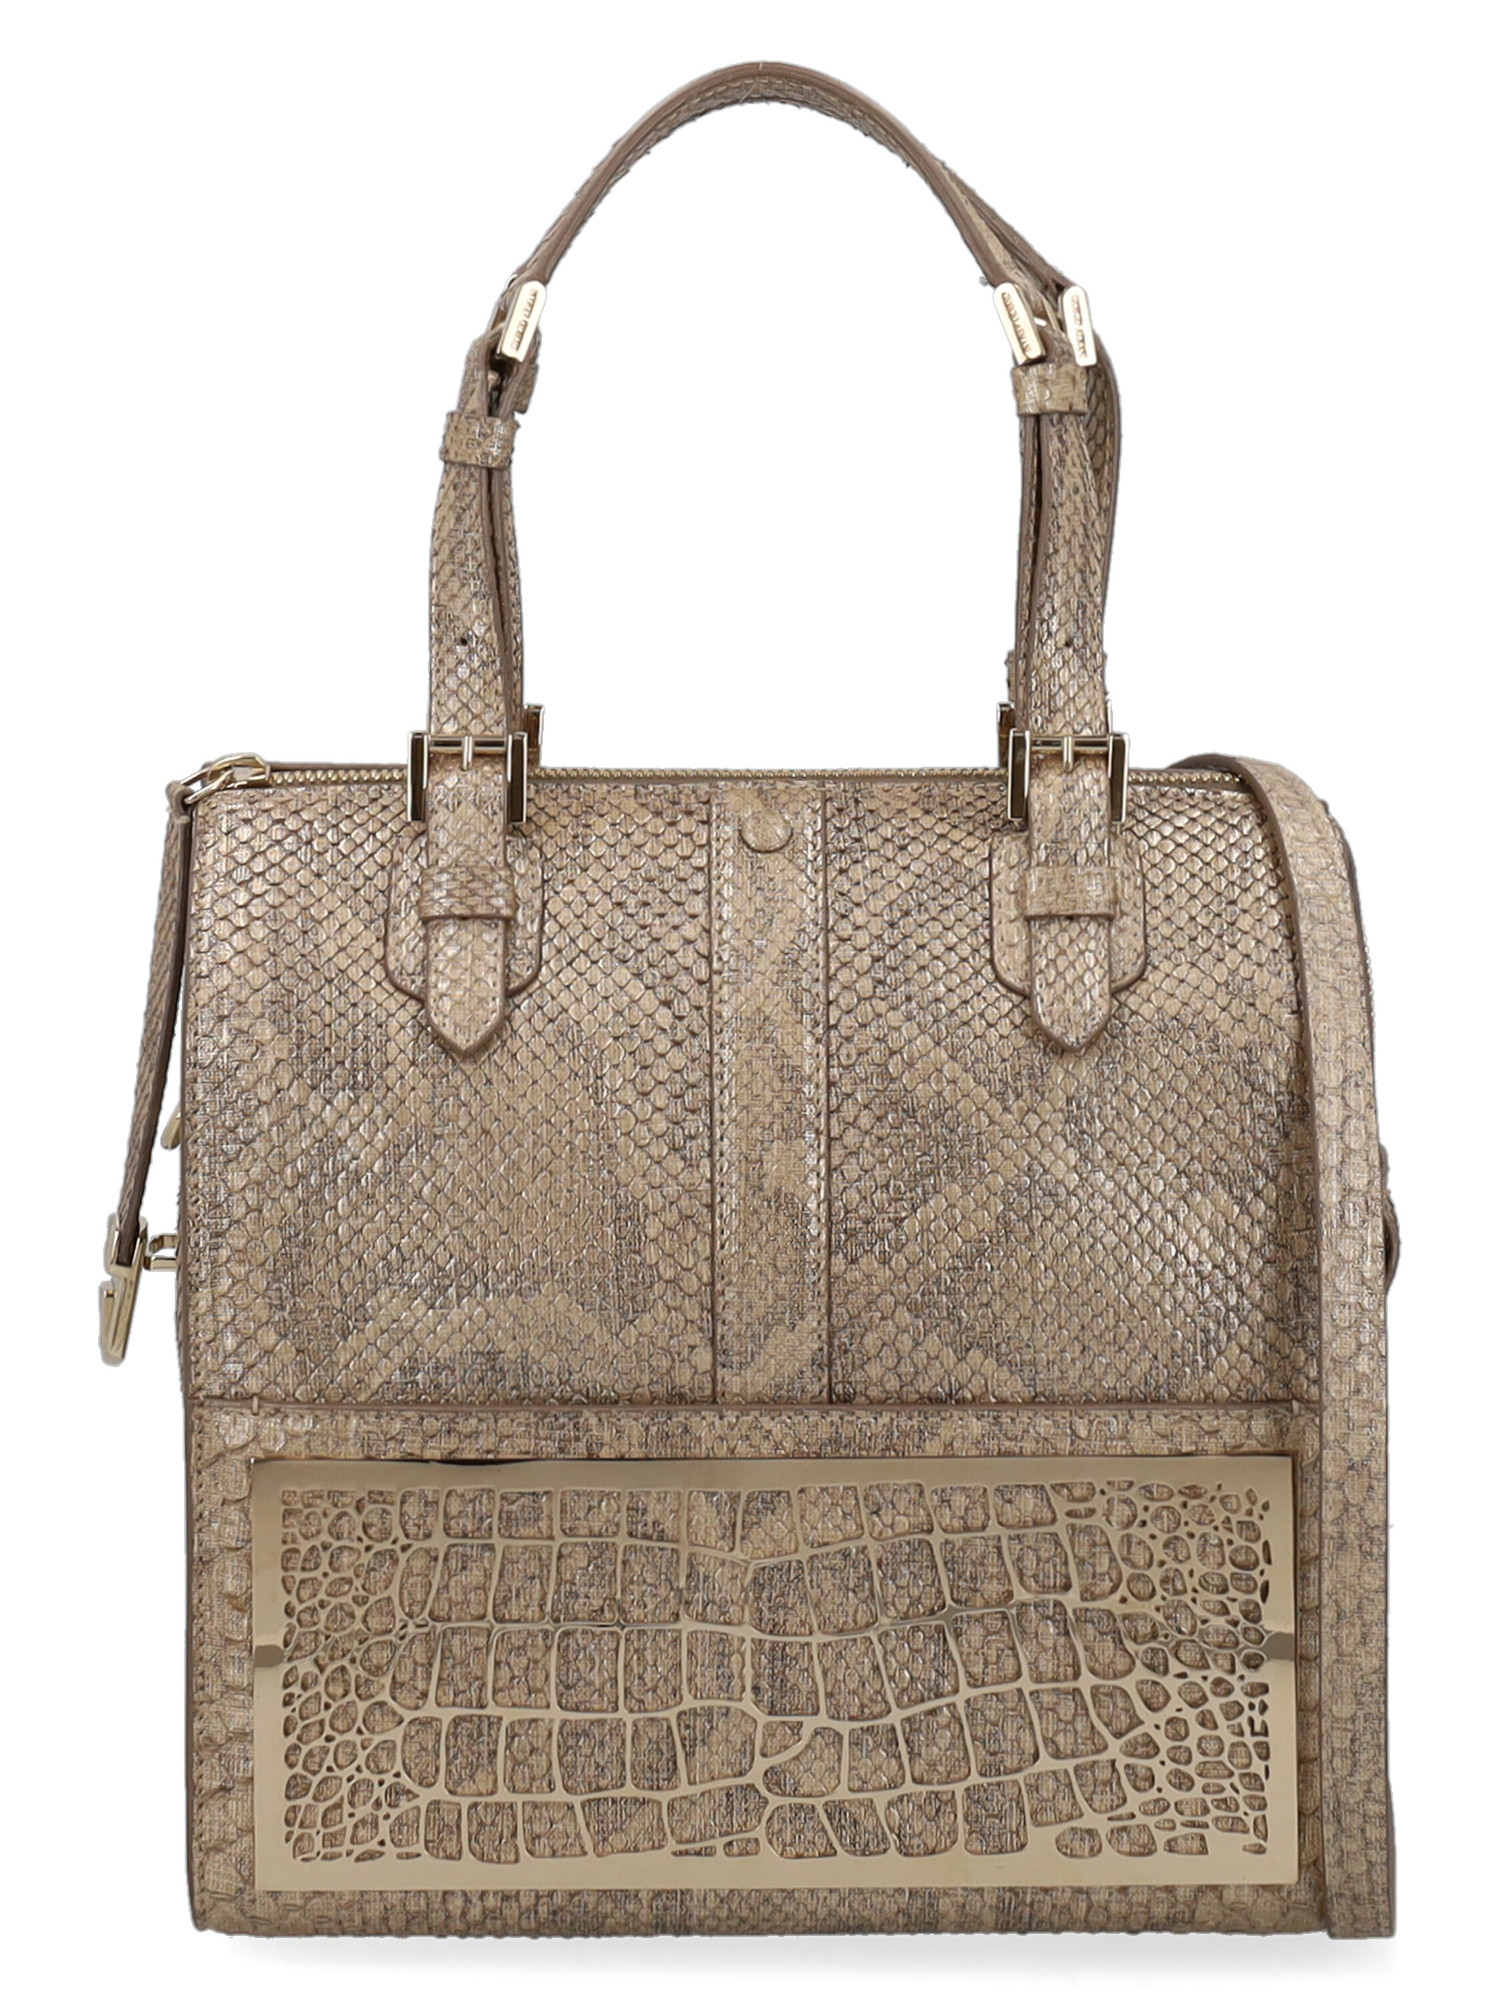 Condition: Very Good, Snake Print Leather, Color: Beige, Gold -  -  -